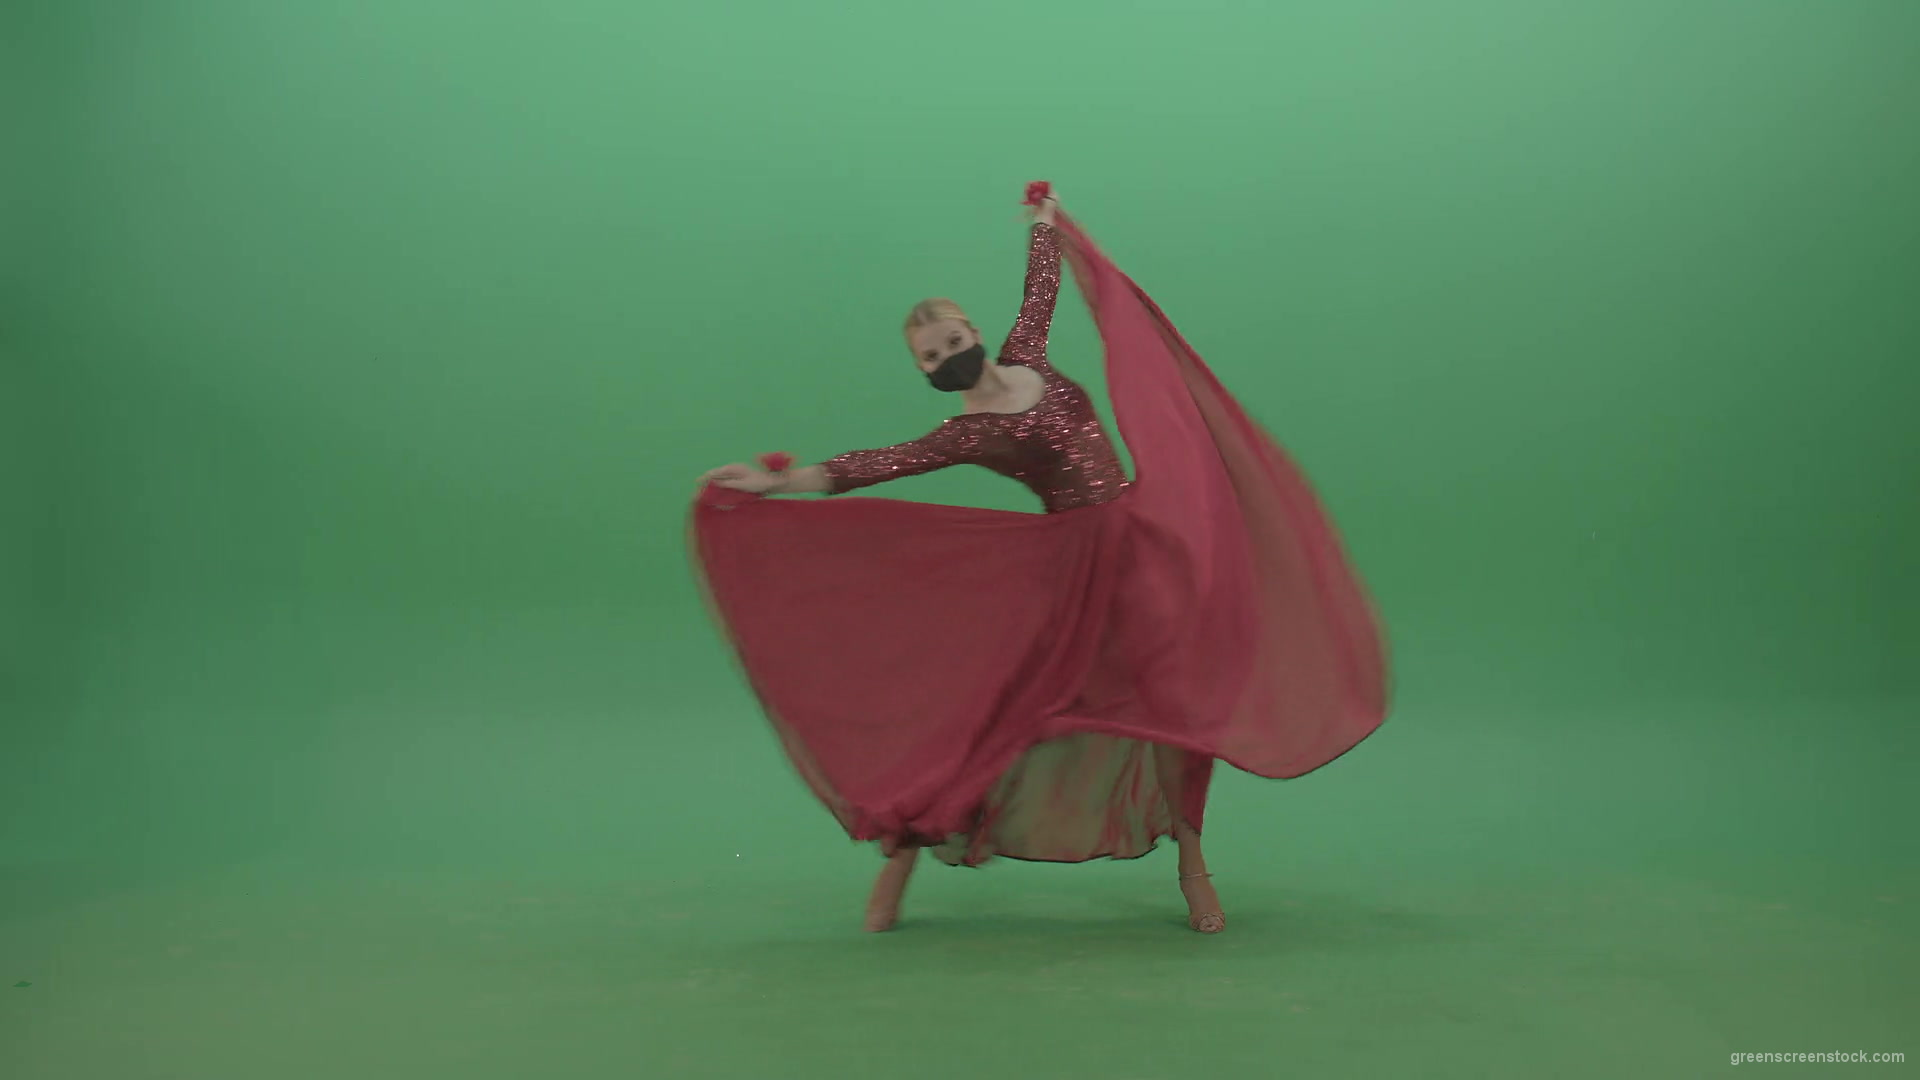 Blonde-Girl-in-red-Flamenco-Dress-makes-spinning-bowing-isolated-on-green-screen-4K-Video-Footage-1920_002 Green Screen Stock